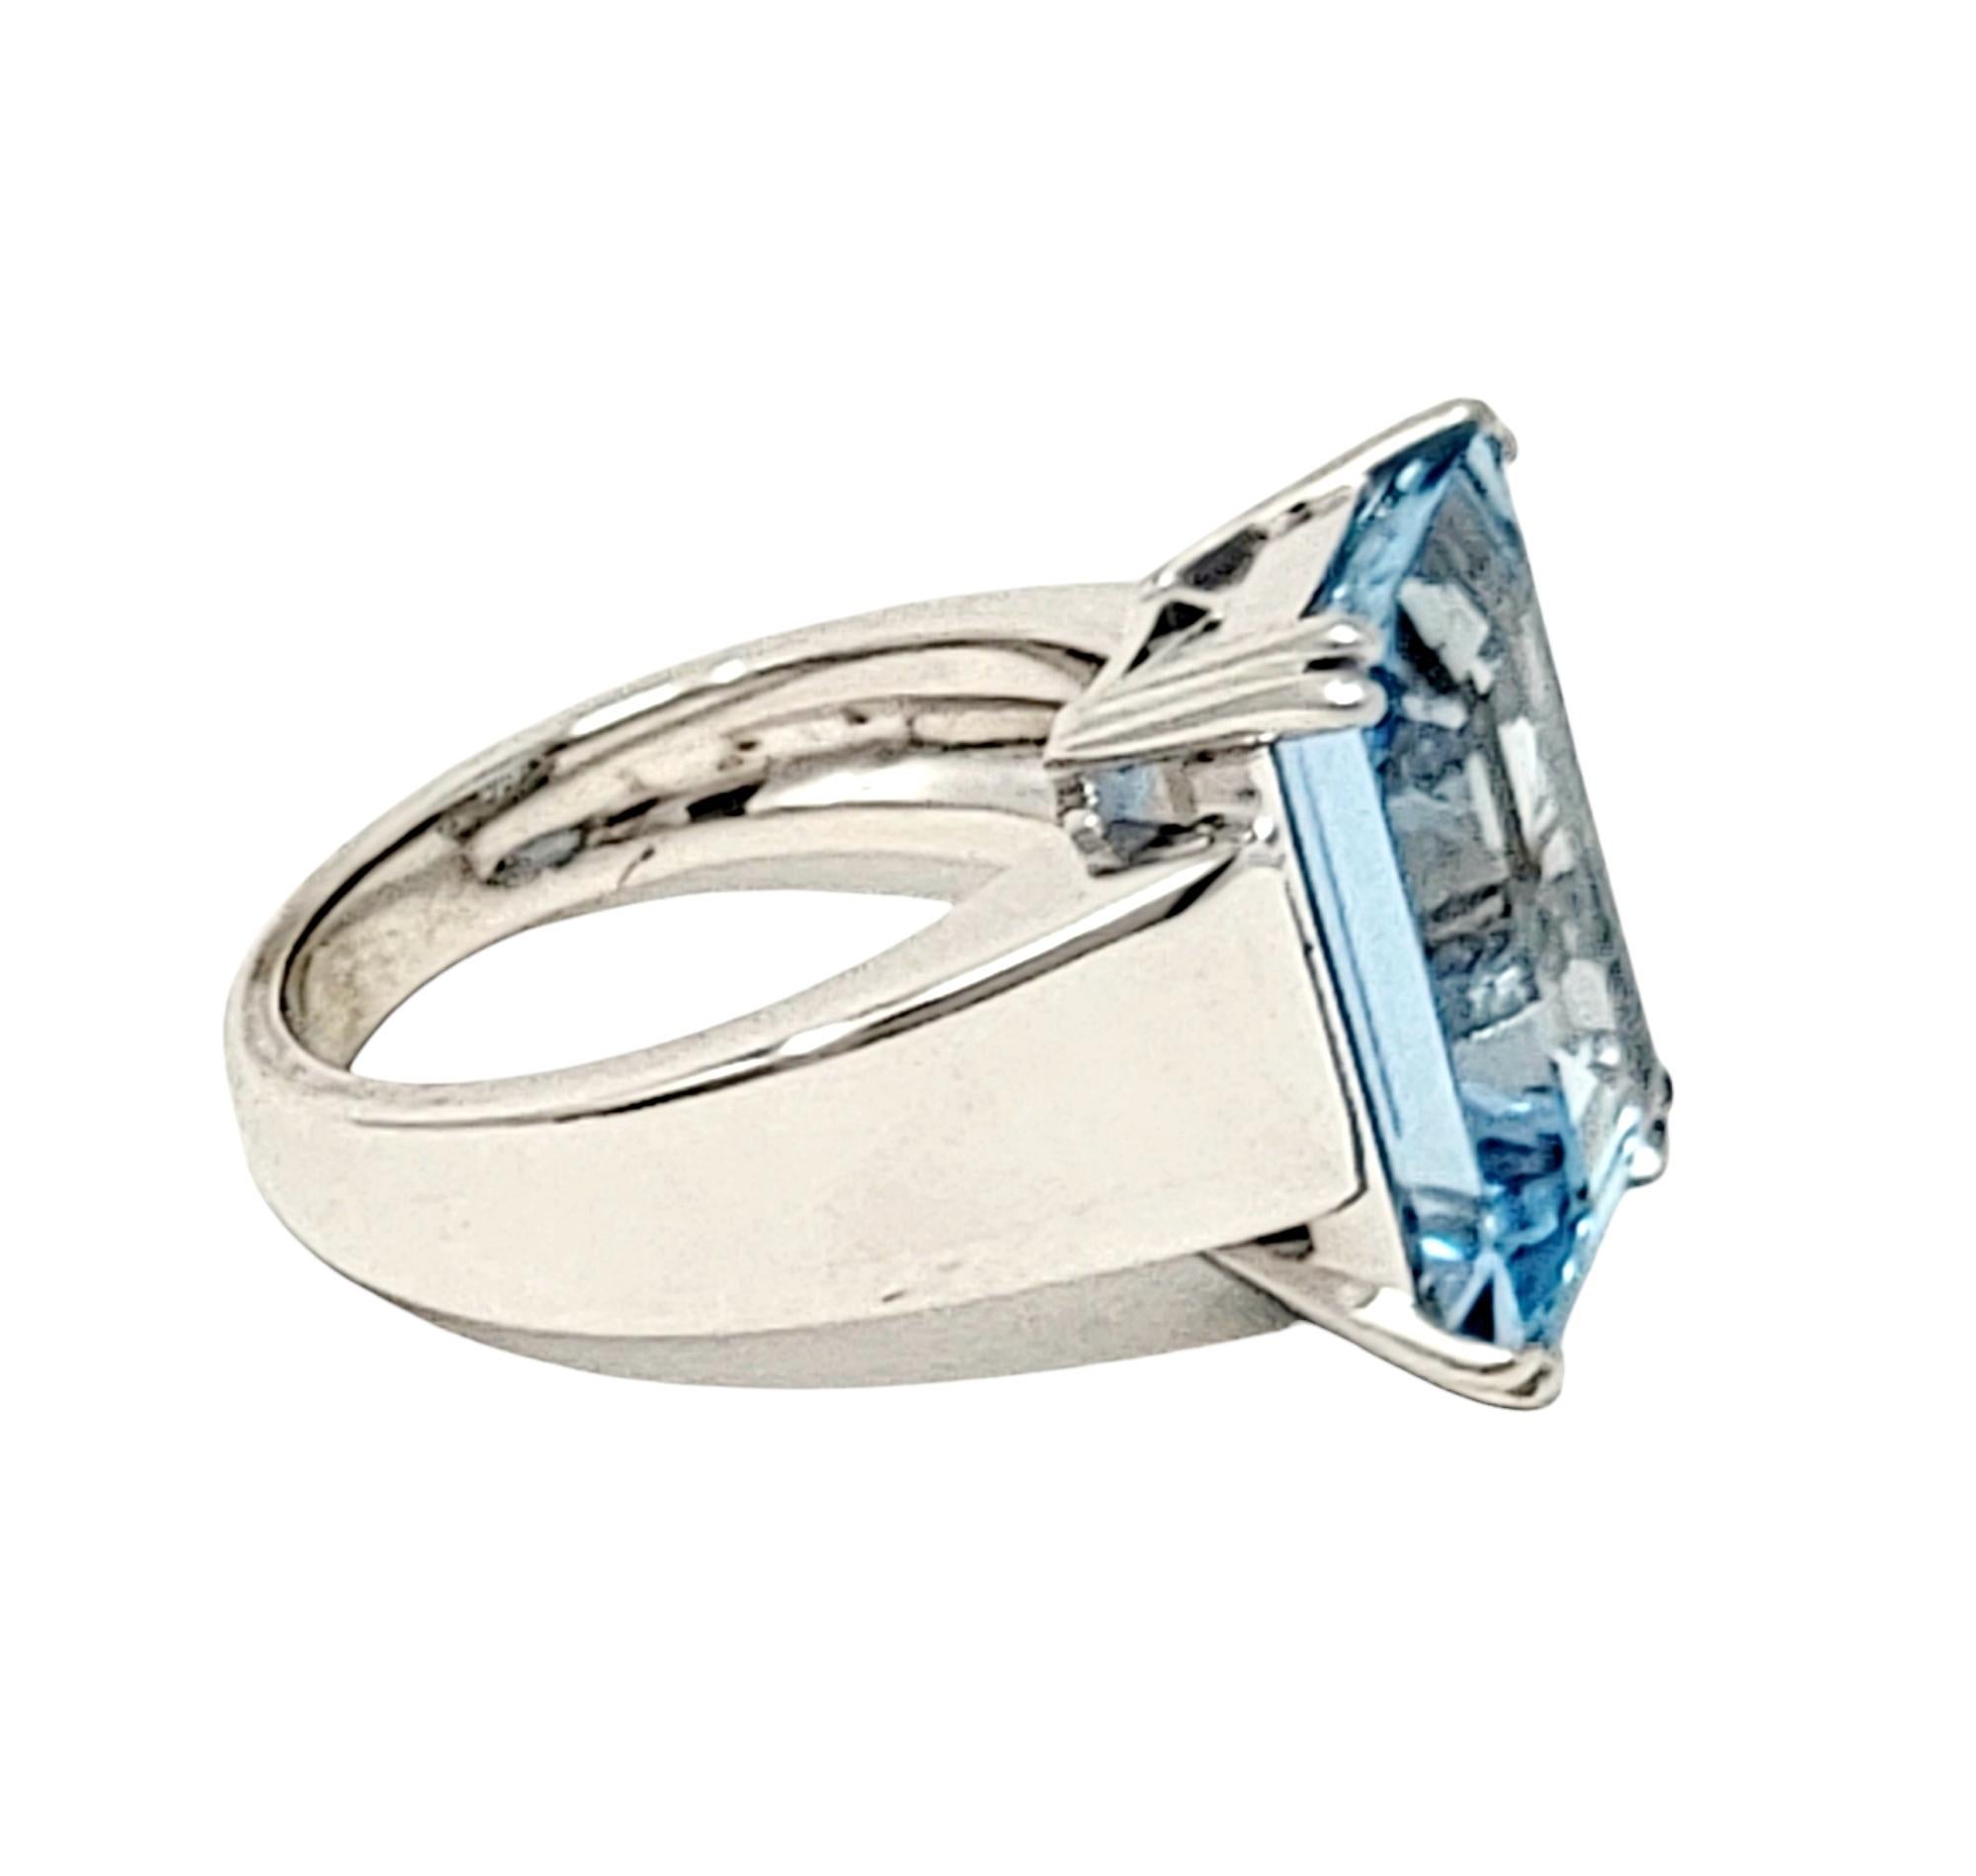 6.29 Carat Total Emerald Cut Aquamarine Solitaire Cocktail Ring in 18 Karat Gold In Good Condition For Sale In Scottsdale, AZ